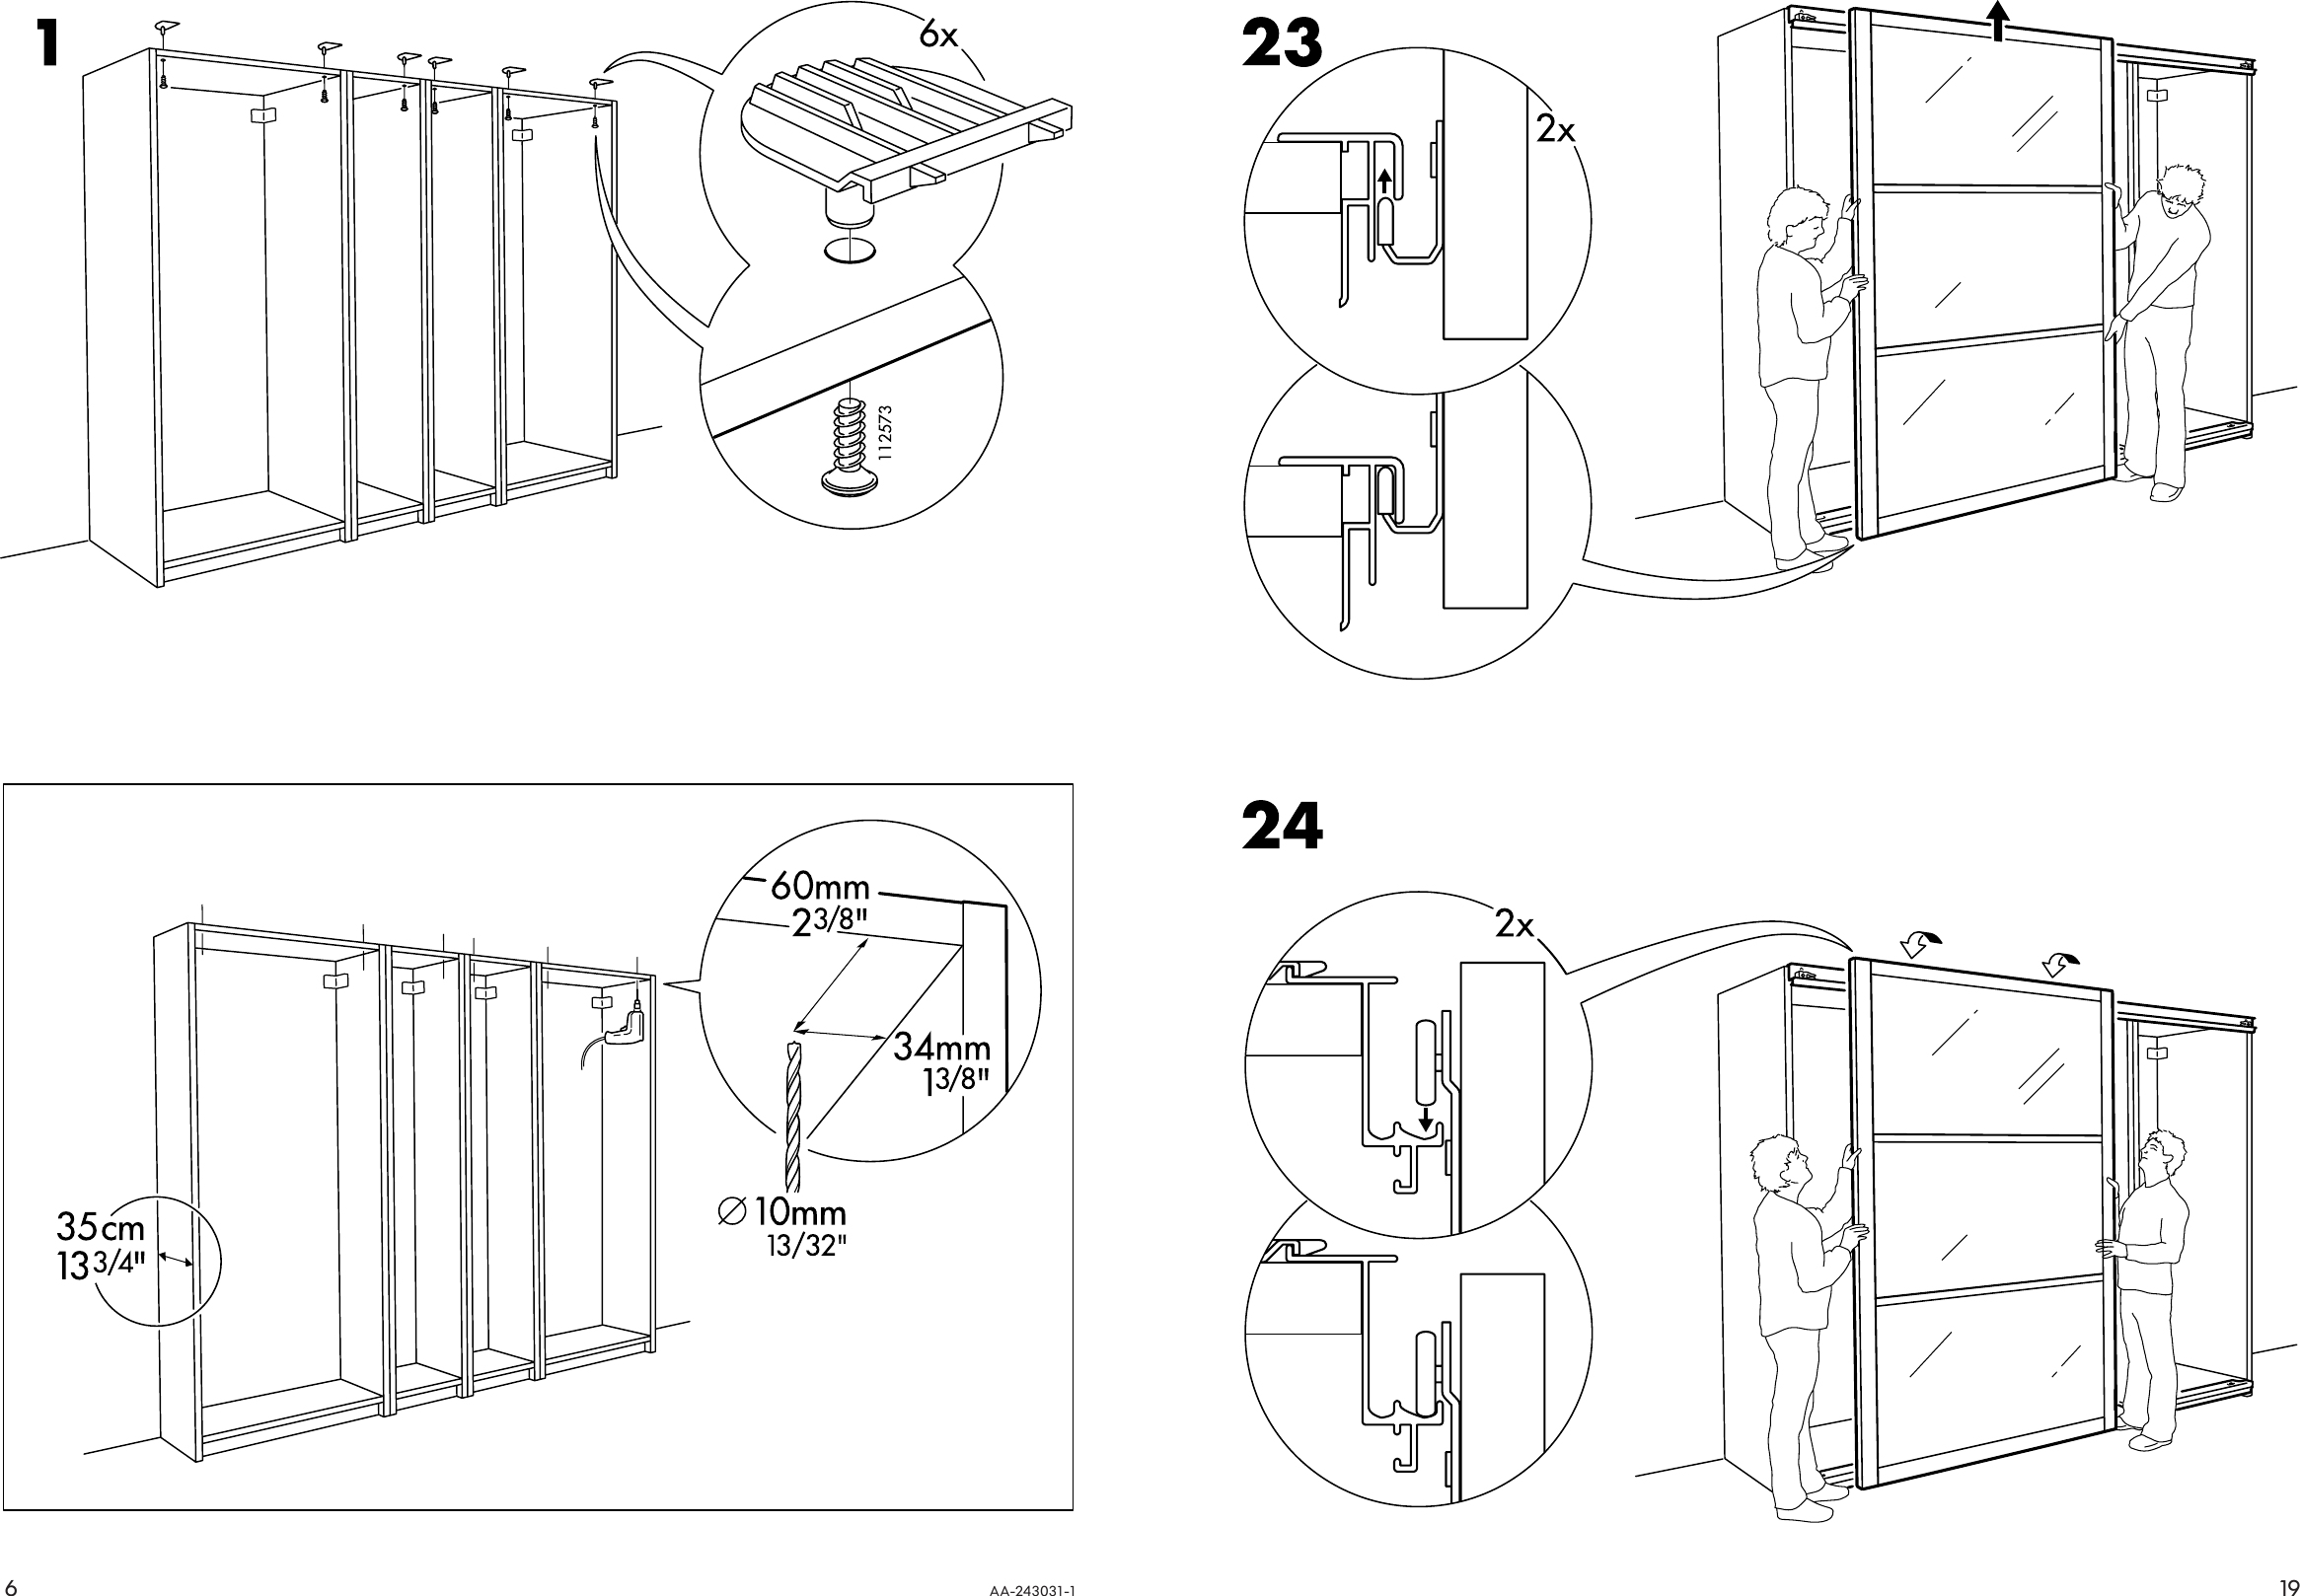 Page 6 of 12 - Ikea Ikea-Pax-Stordal-Sliding-Door-Pair-98X93-Assembly-Instruction